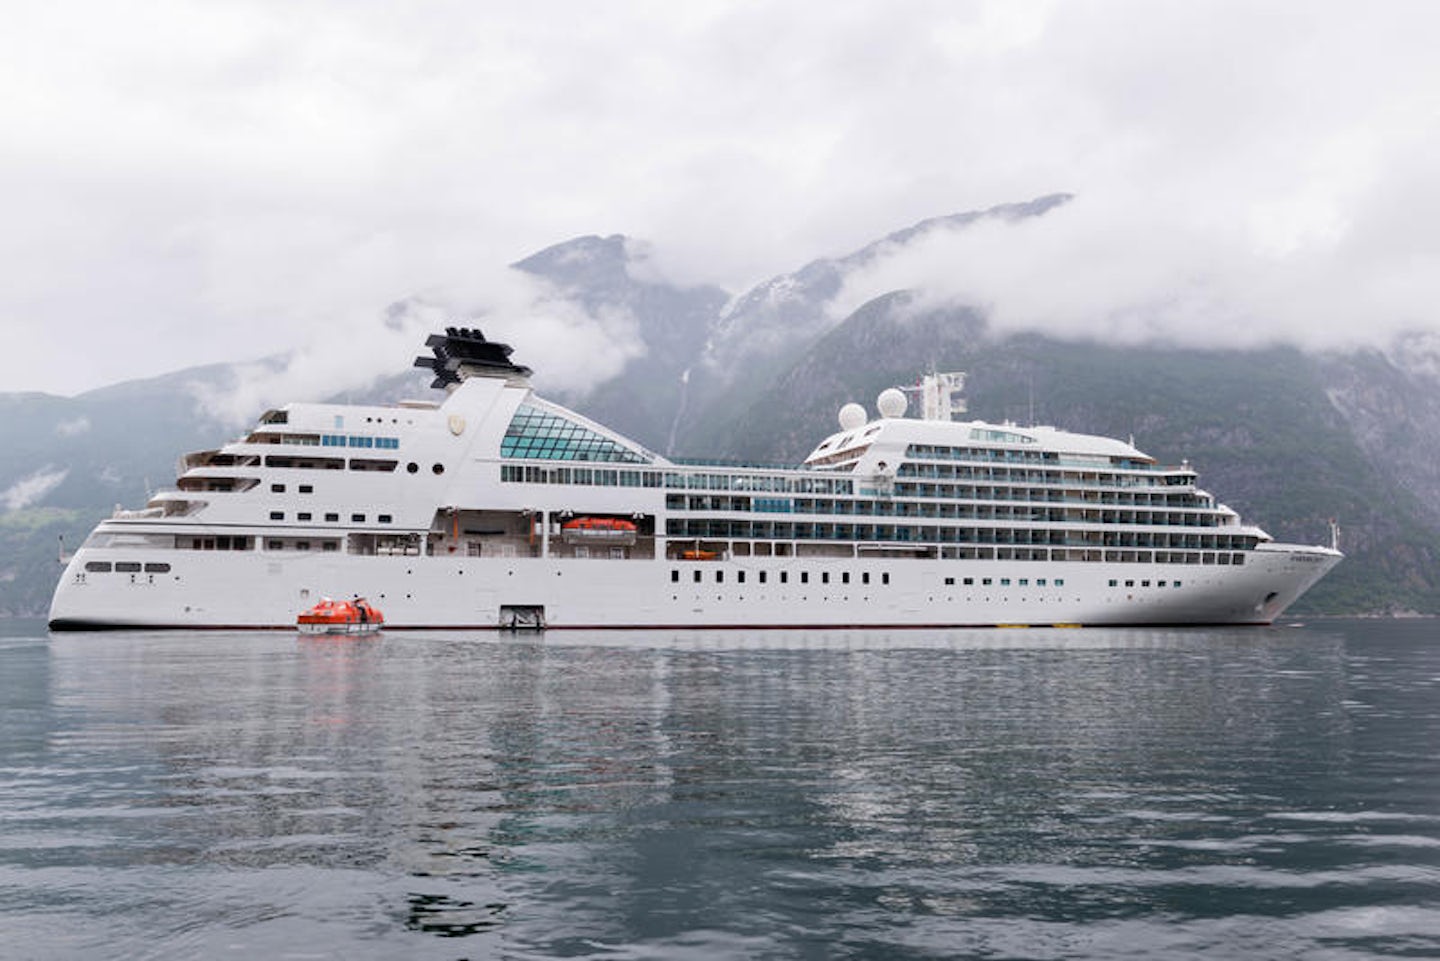 Ship Exterior on Seabourn Quest